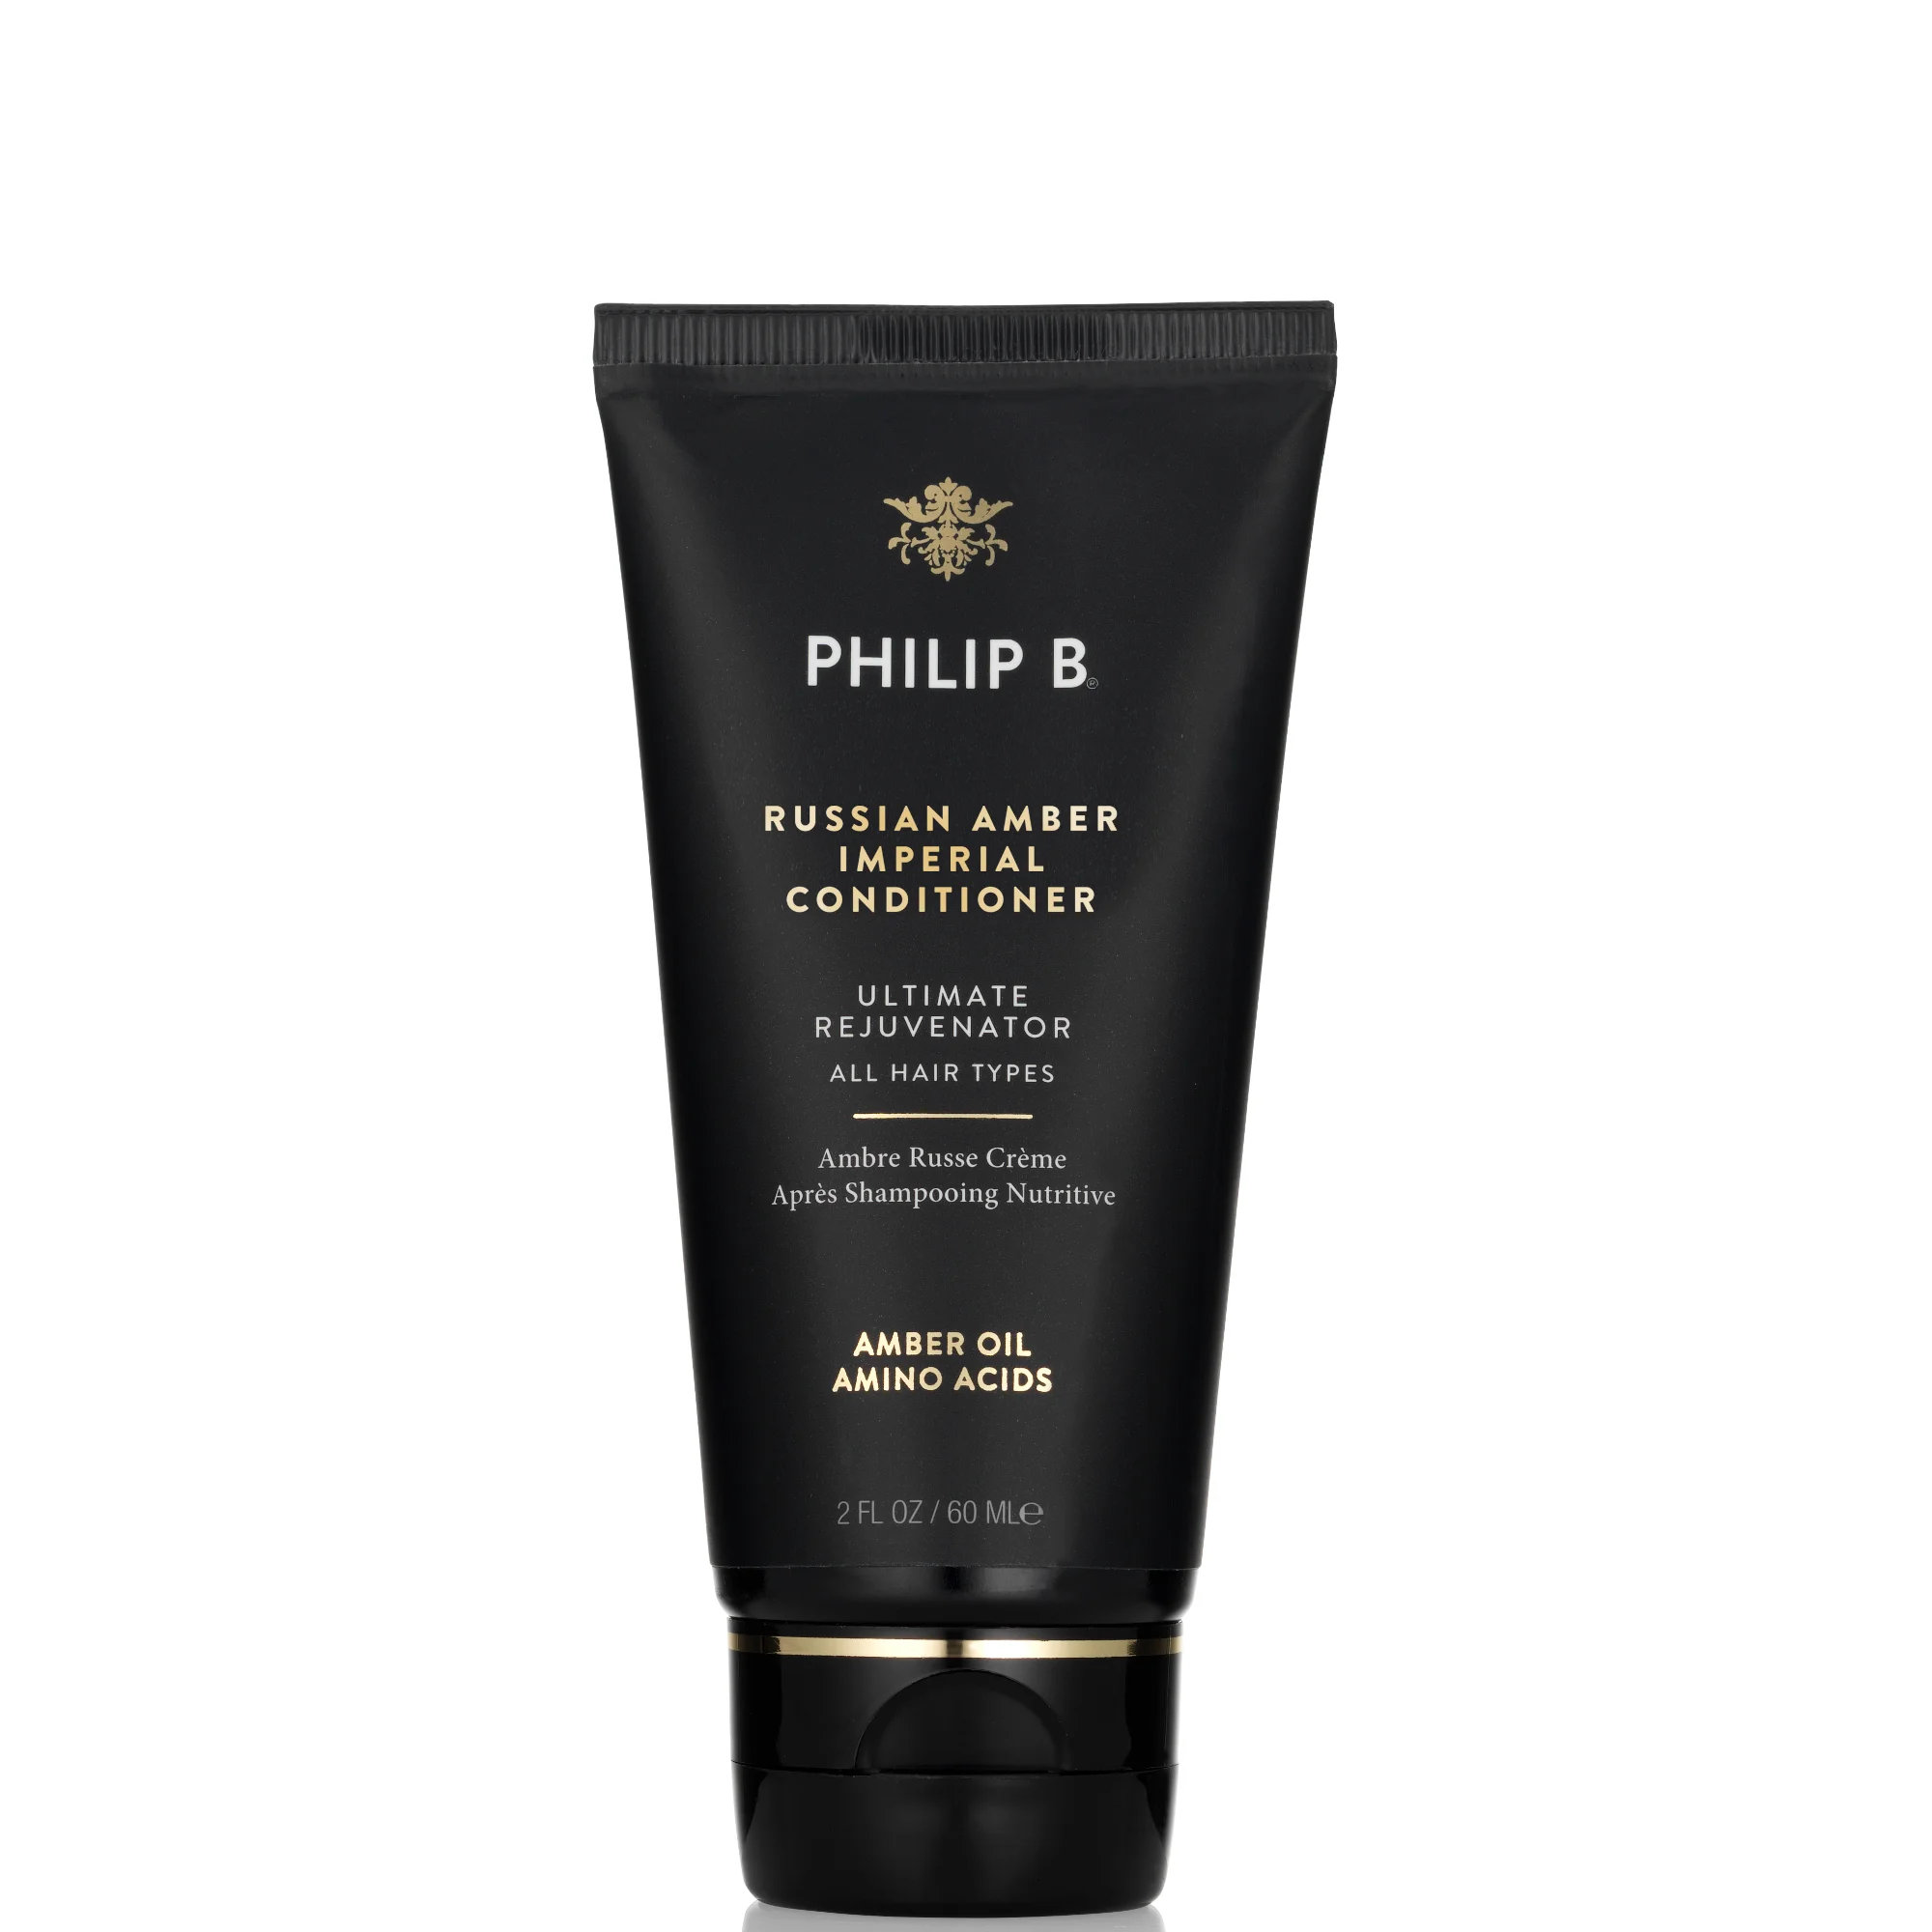 Philip B Russian Amber Imperial Conditioning Crème (60ml) Image 1